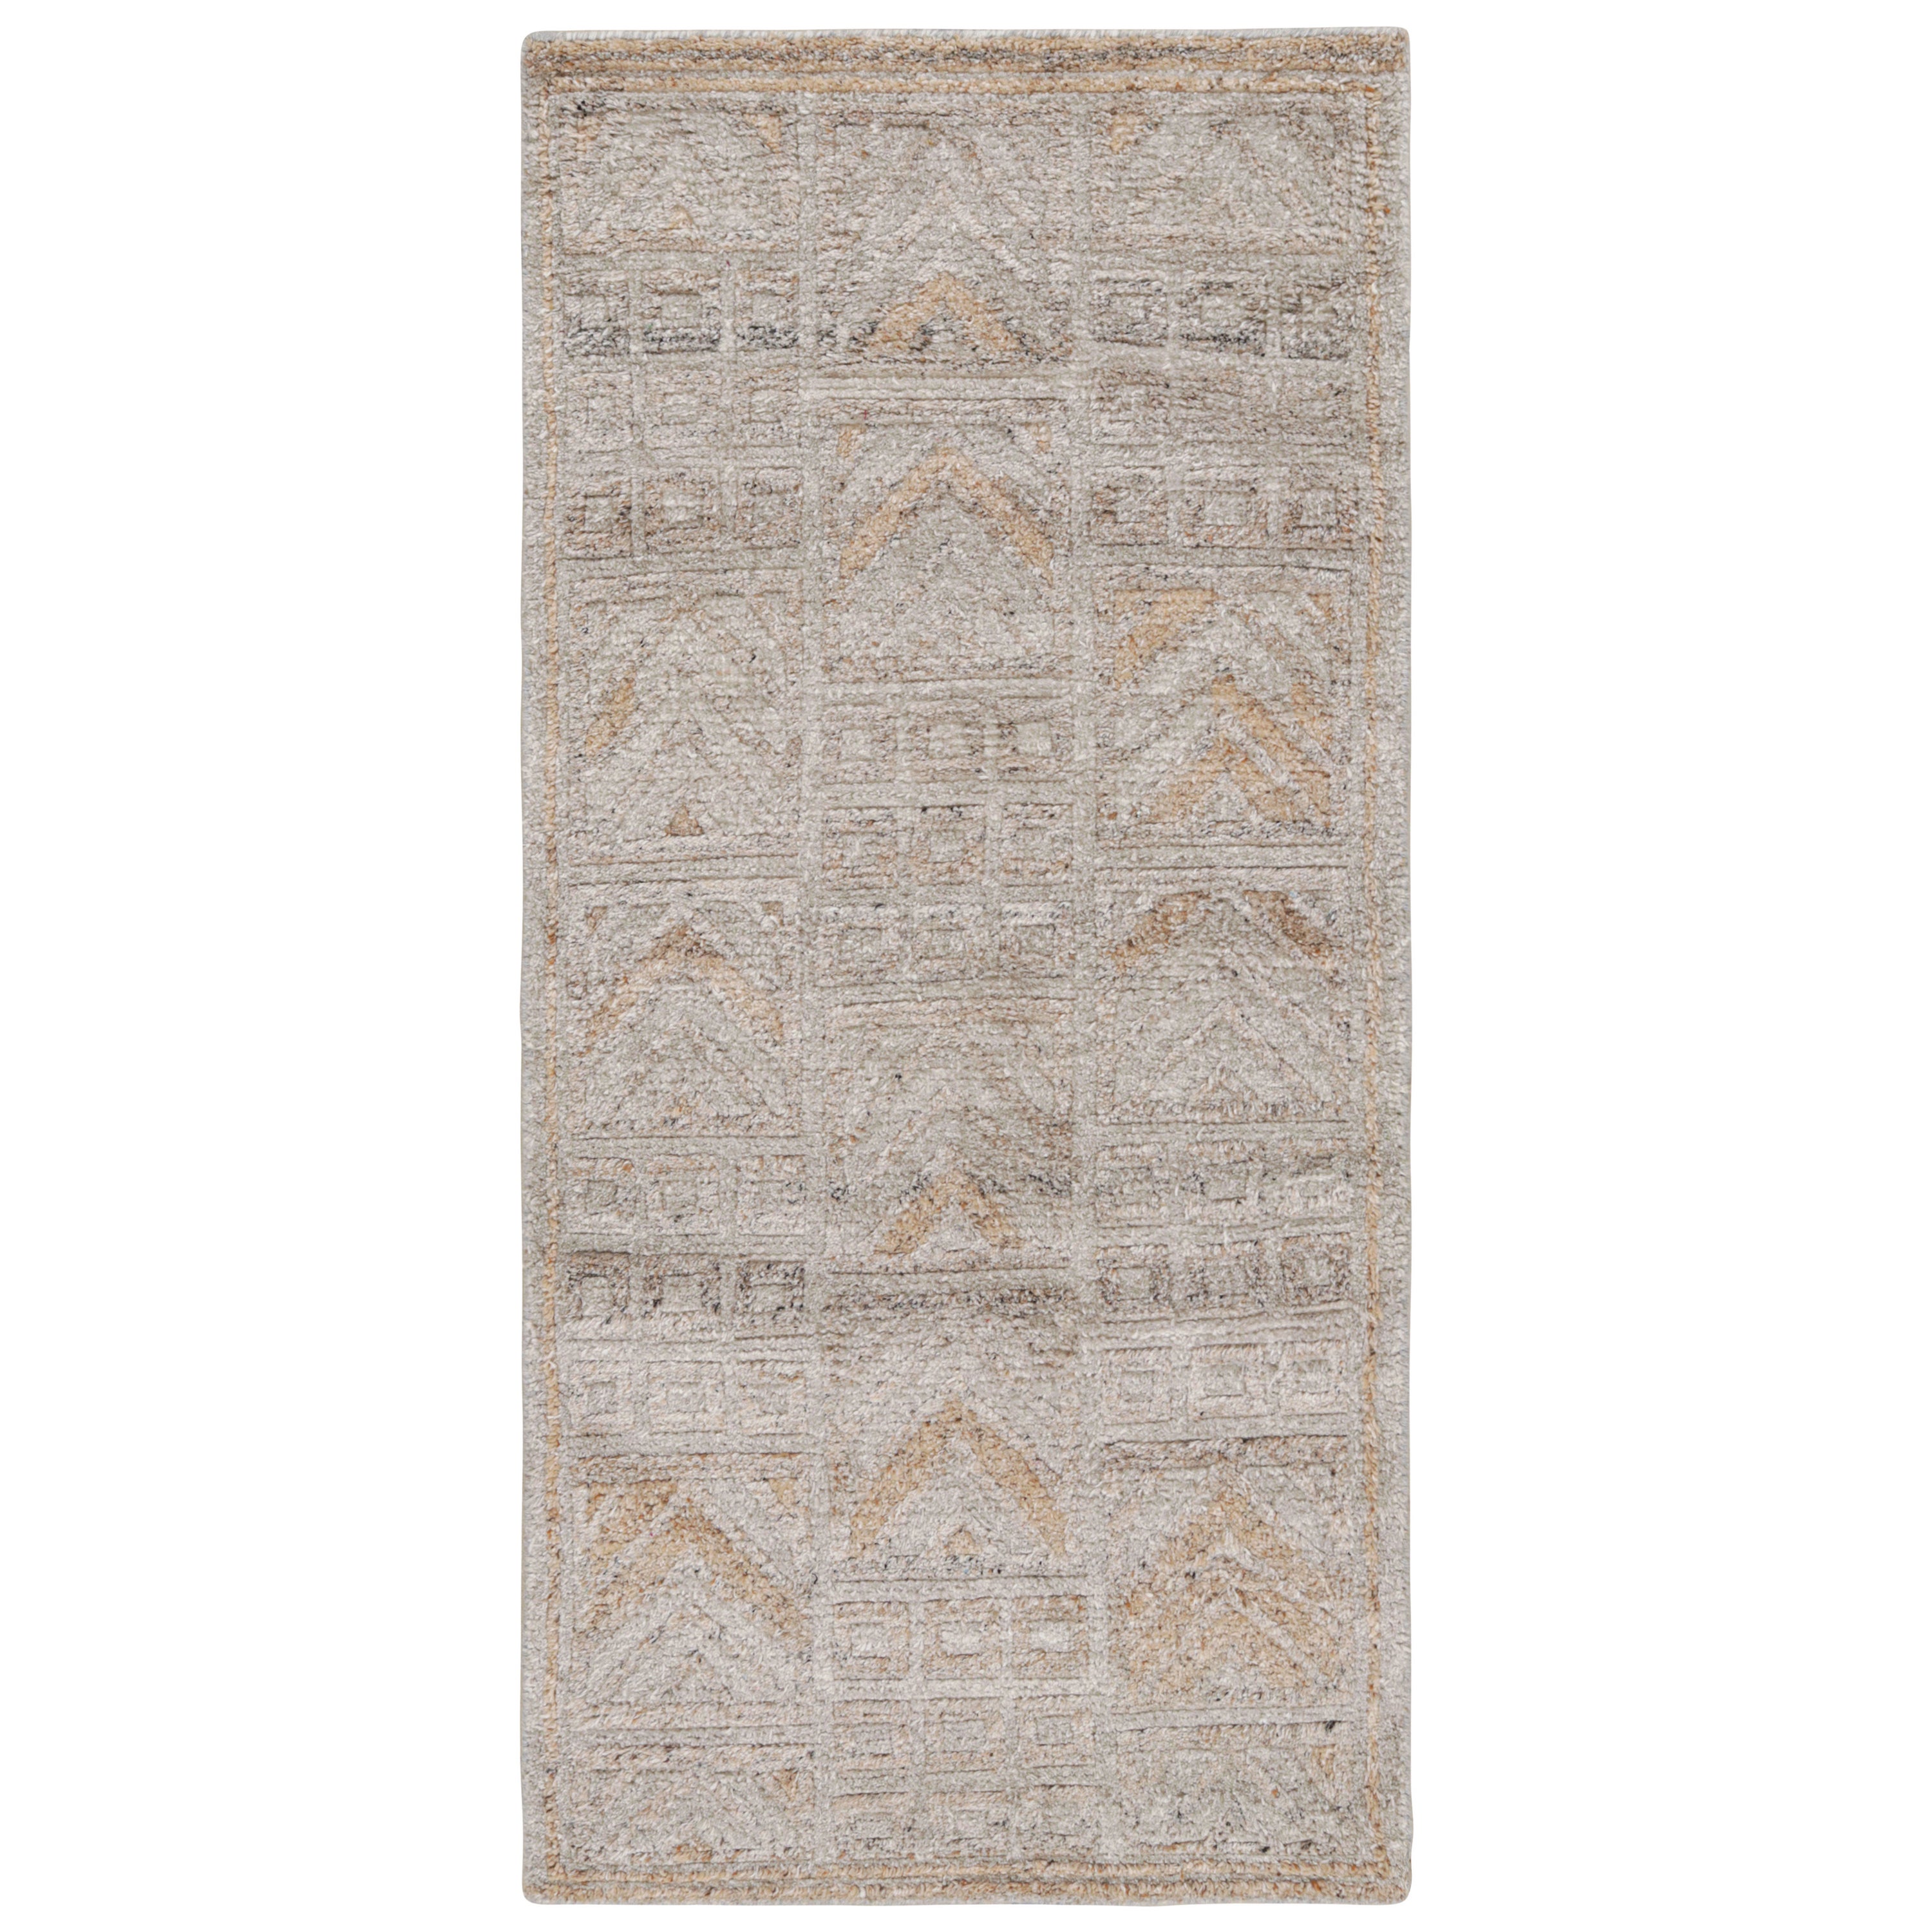 Rug & Kilim’s Outdoor Scandinavian Style Runner in Gray with Geometric Patterns For Sale